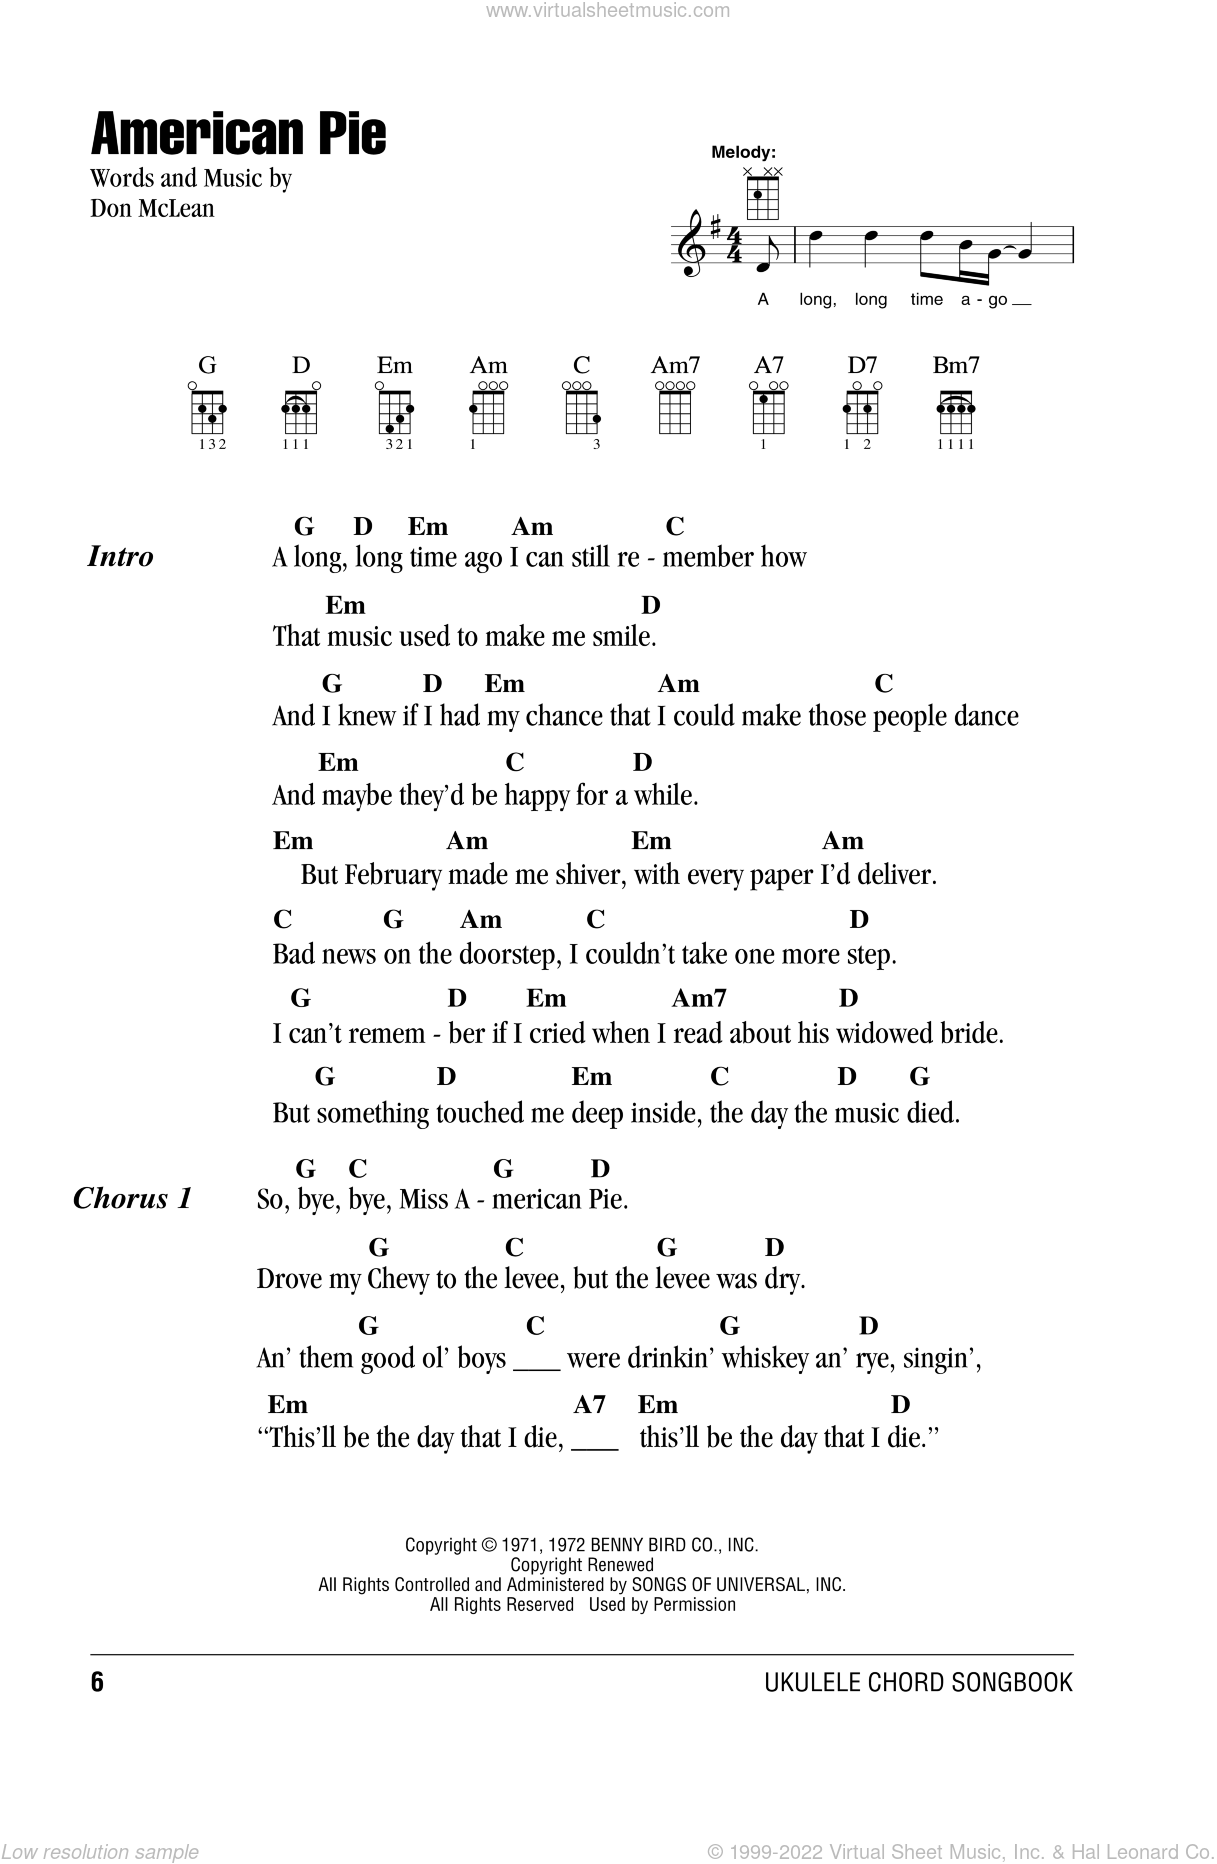 Just The Two Of Us sheet music for ukulele (PDF)